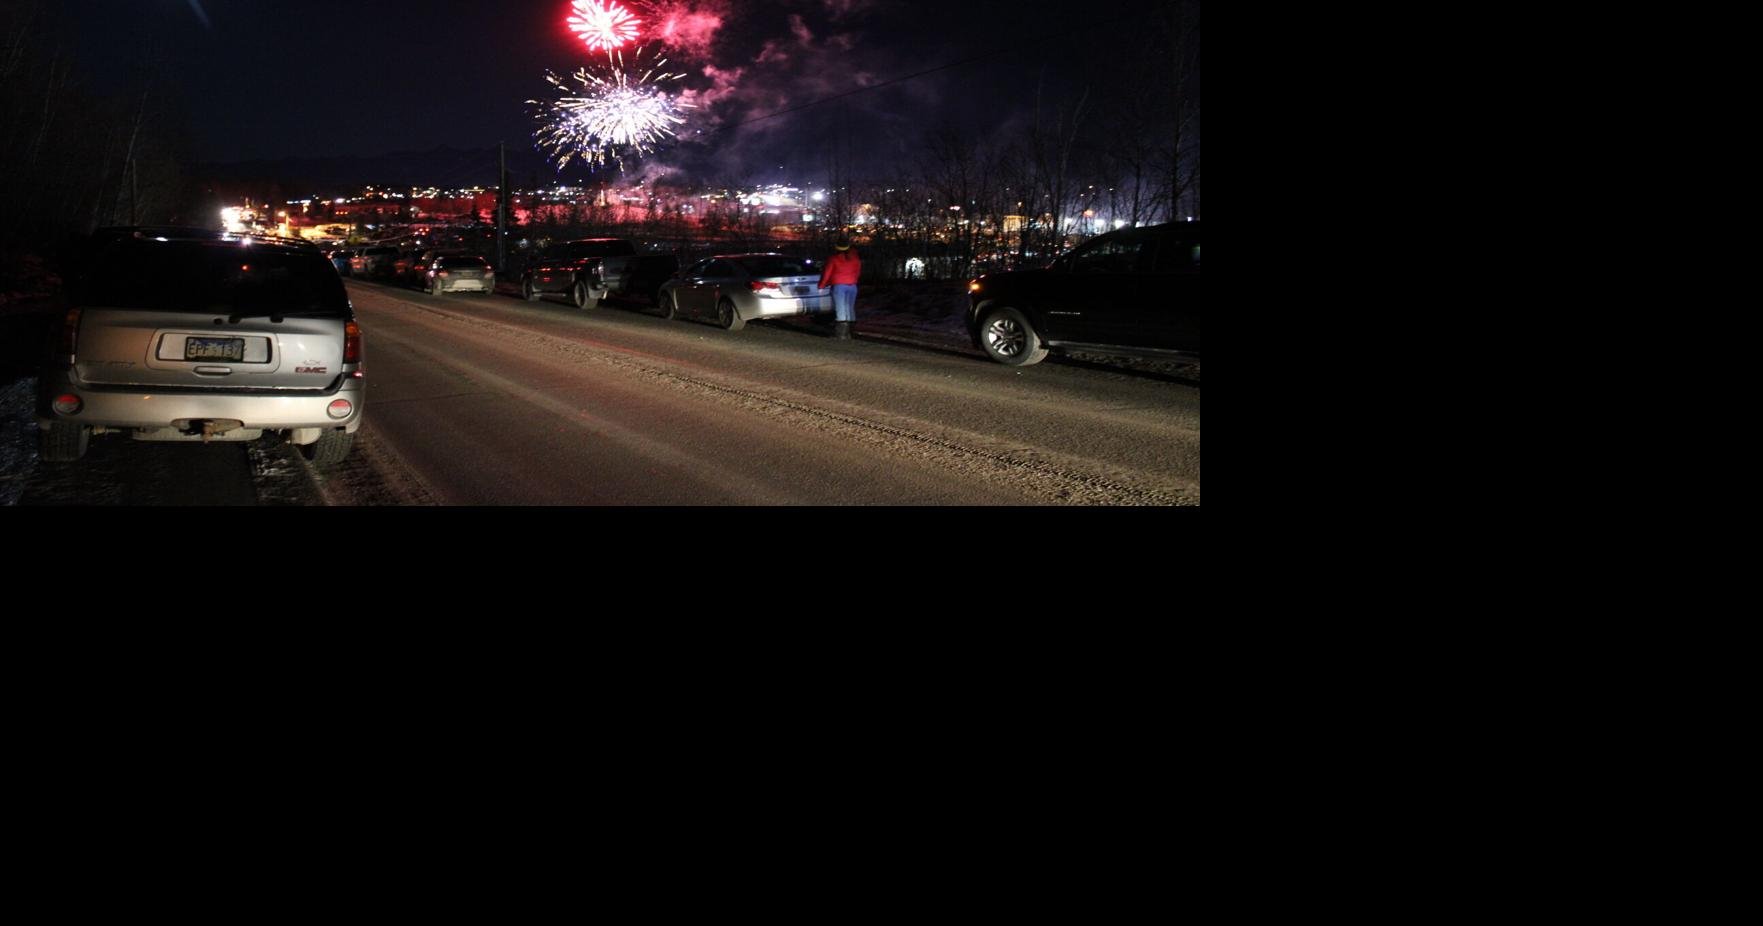 City of Wasilla keeps longtime tradition of New Years Eve fireworks